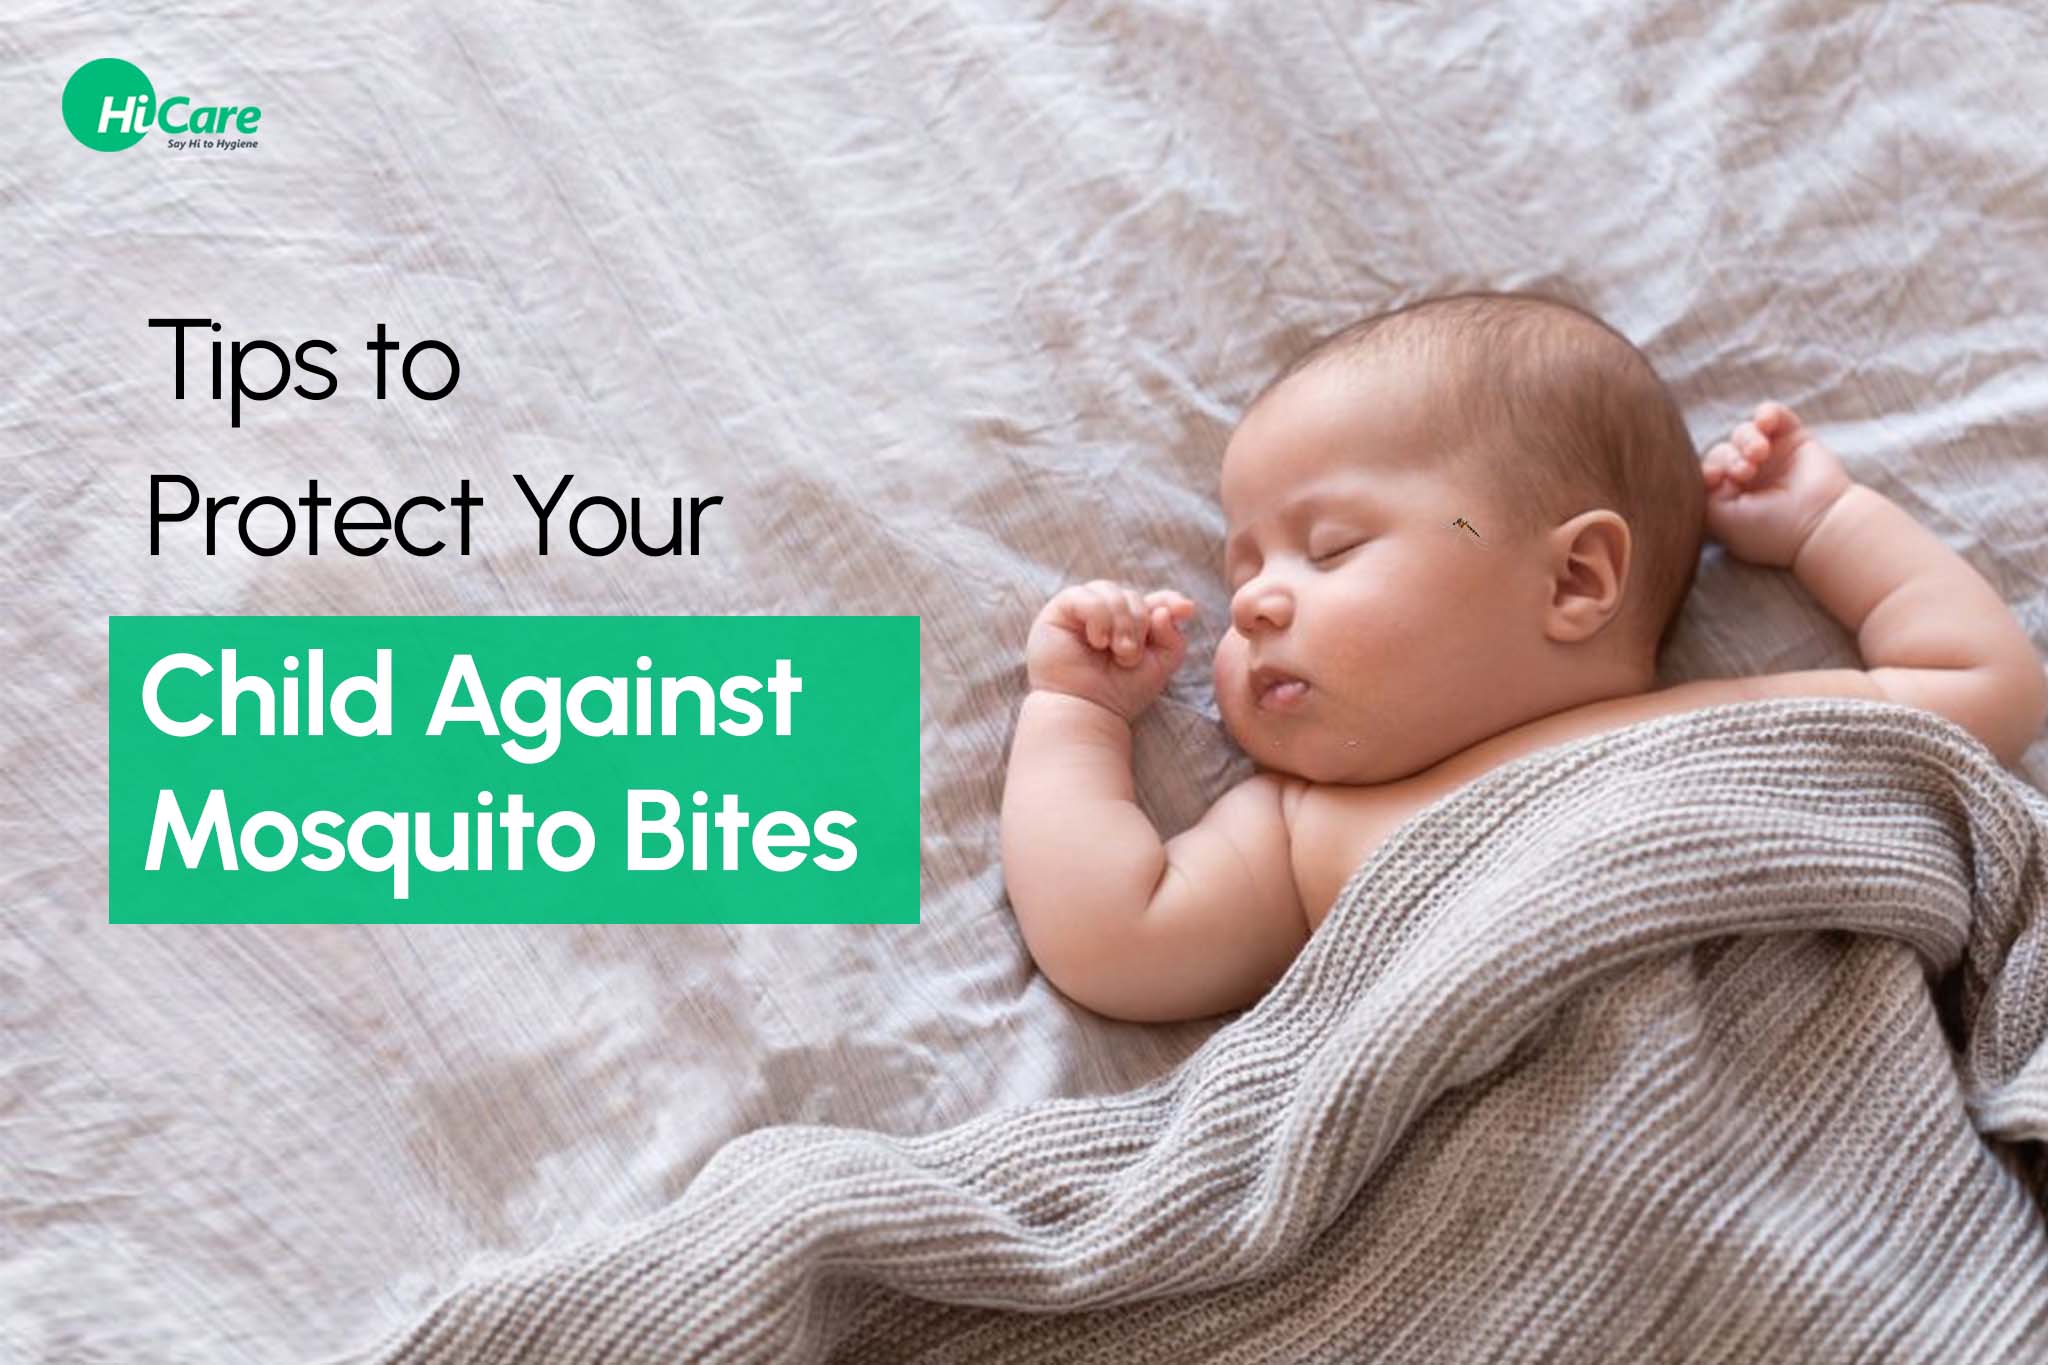 7 Tips to Protect Your Child Against Mosquito Bites